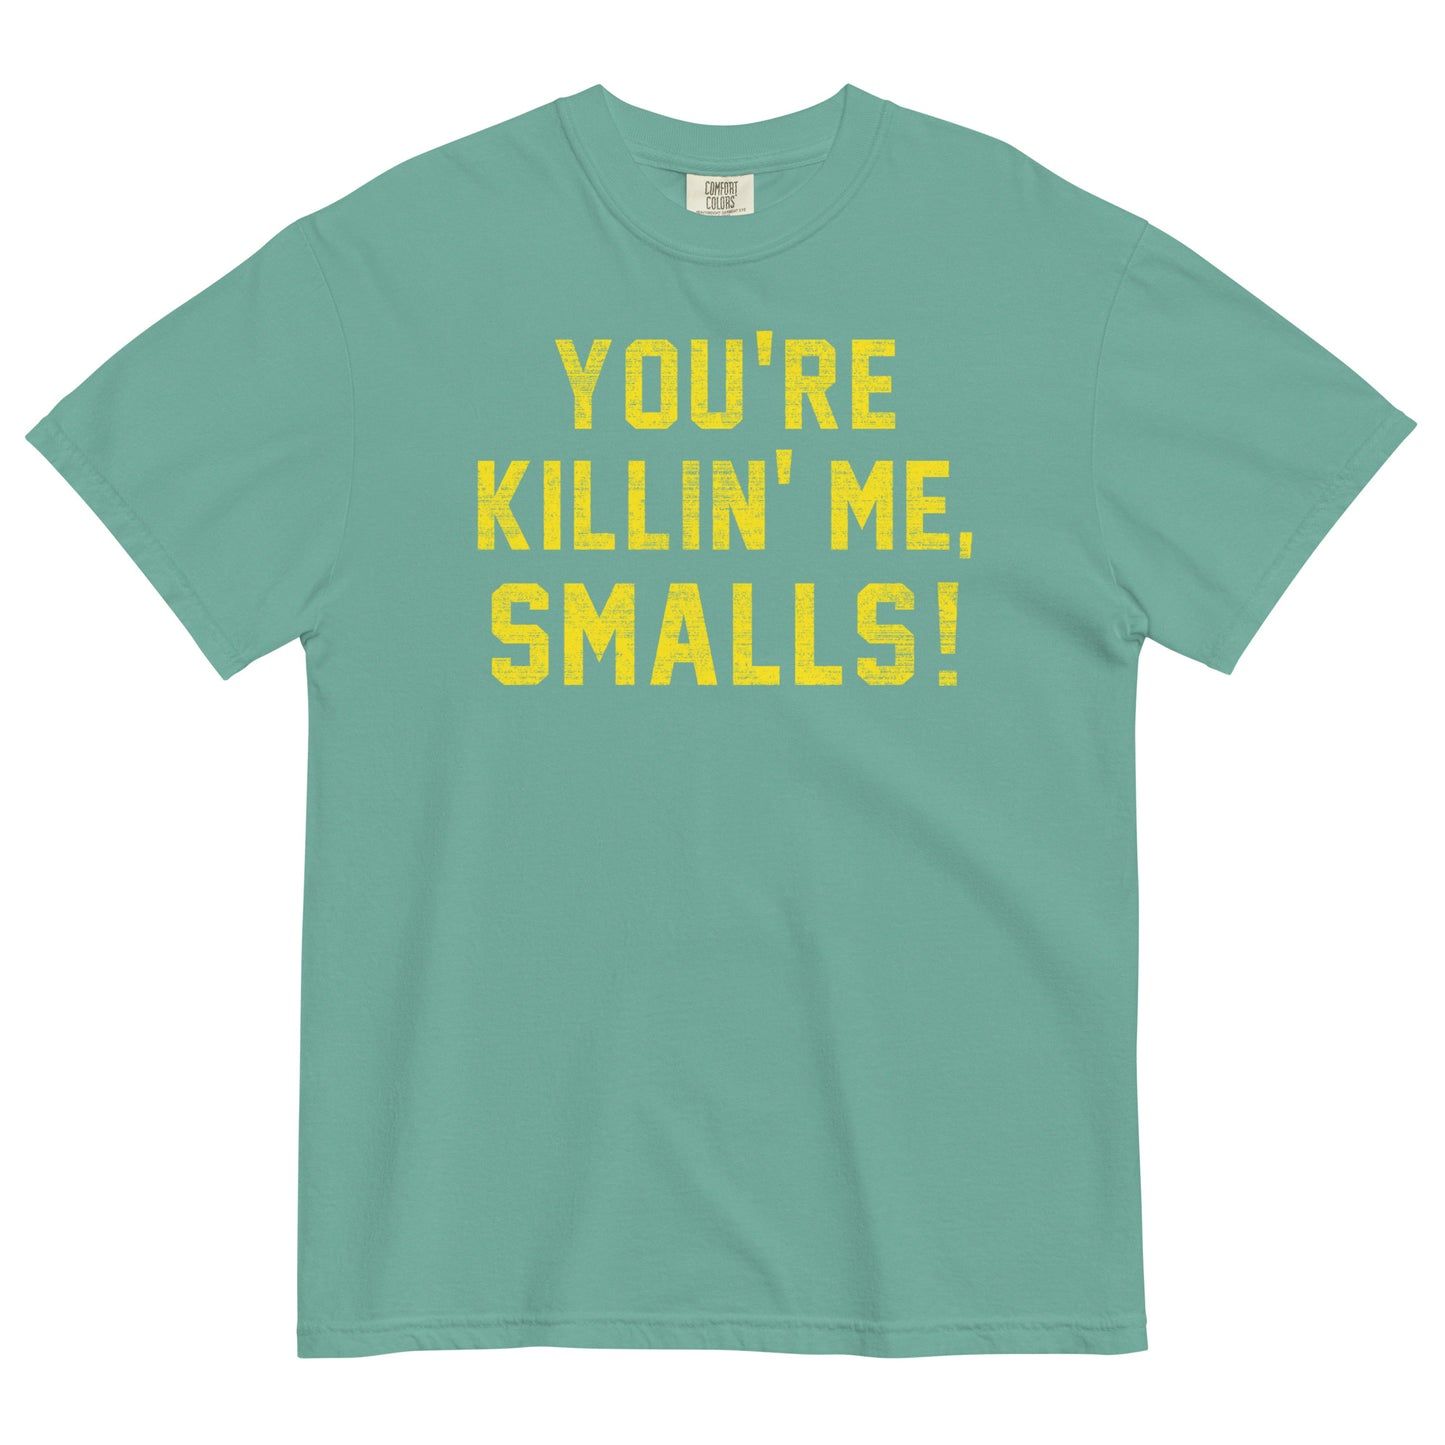 You're Killin' Me Smalls! Men's Relaxed Fit Tee